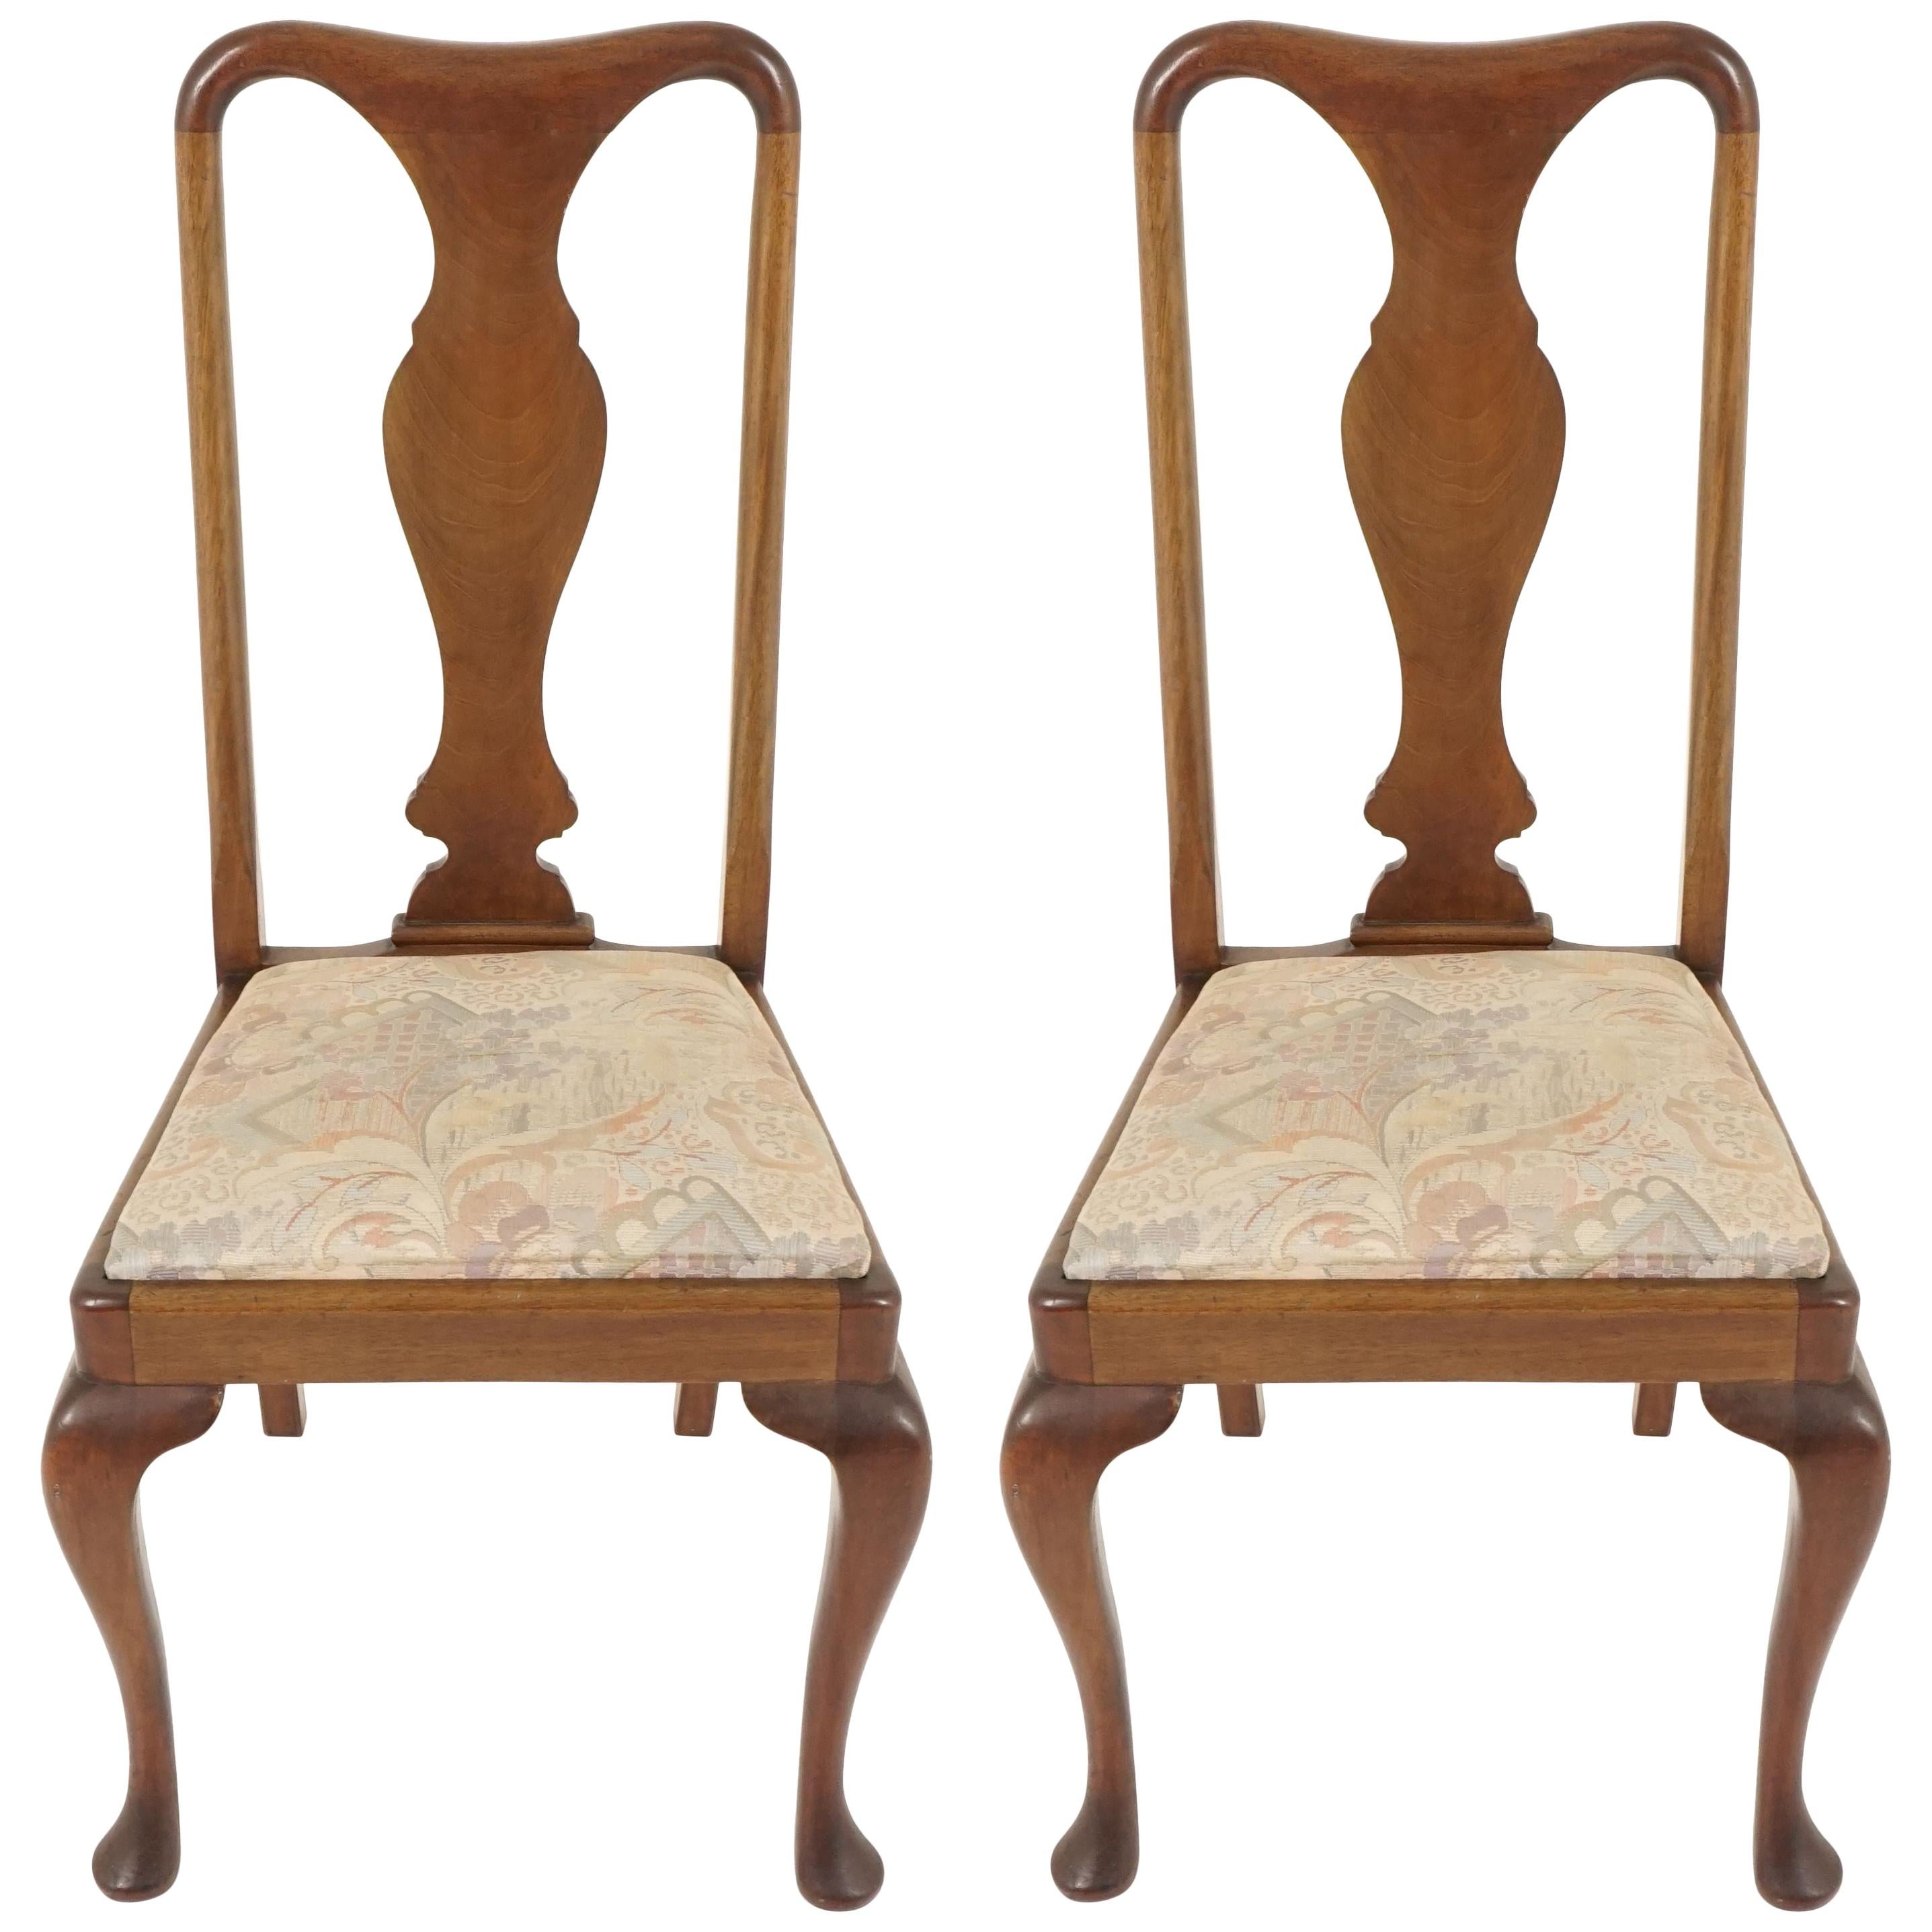 Antique Pair of Mahogany Queen Anne Style Dining Chairs, Scotland 1920, B2167A